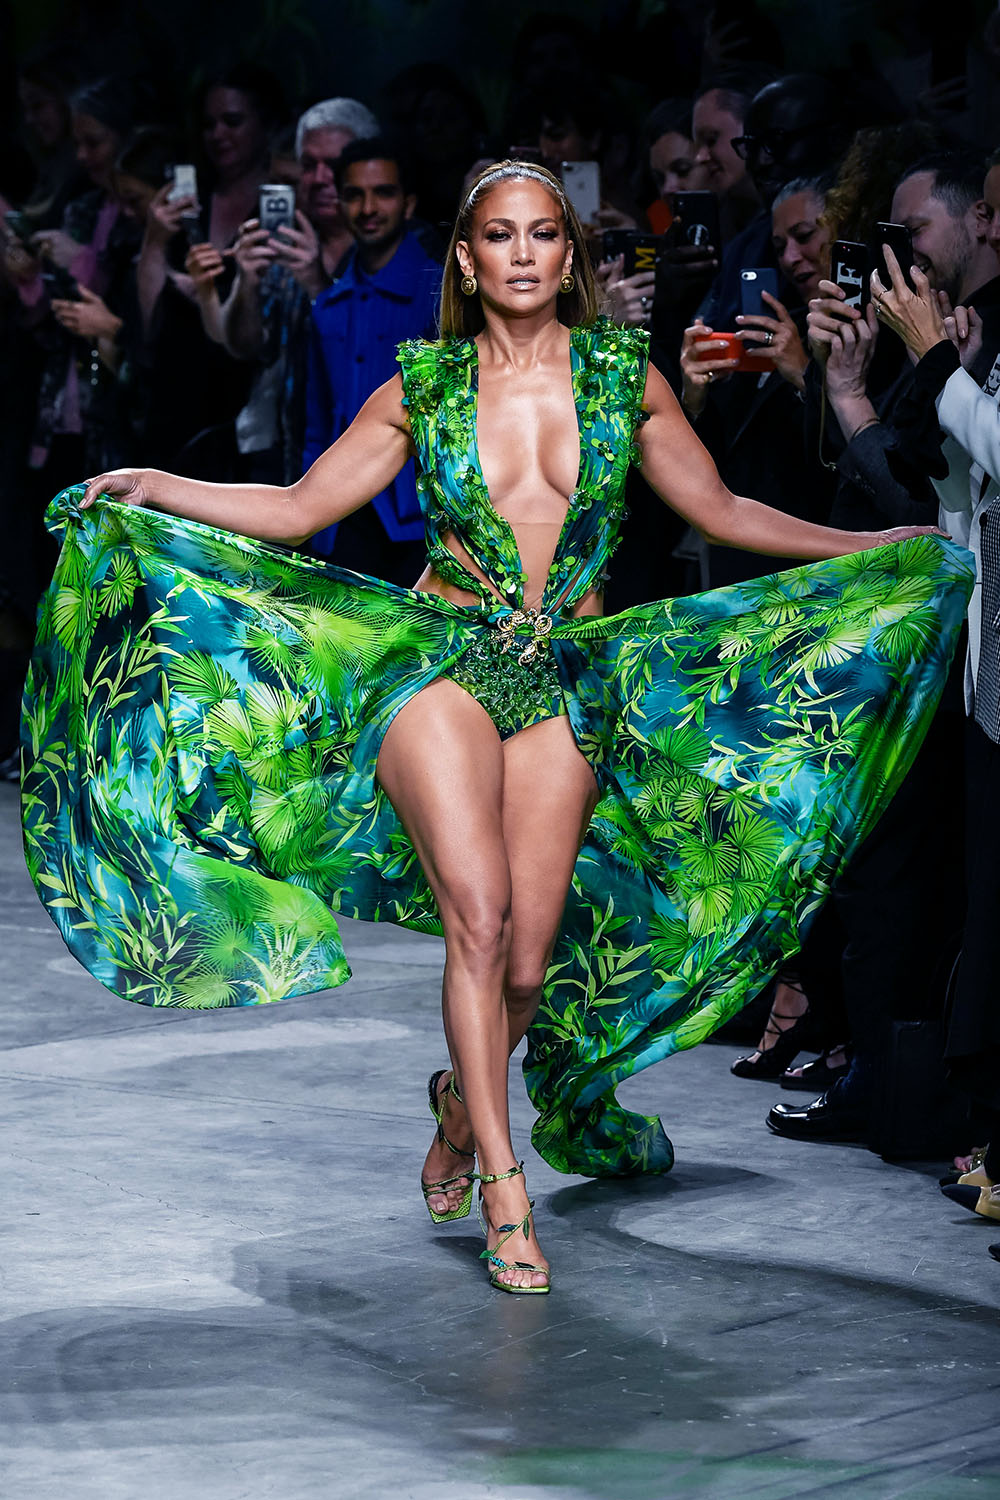 Versace after J-Lo: What the mega-brand did next